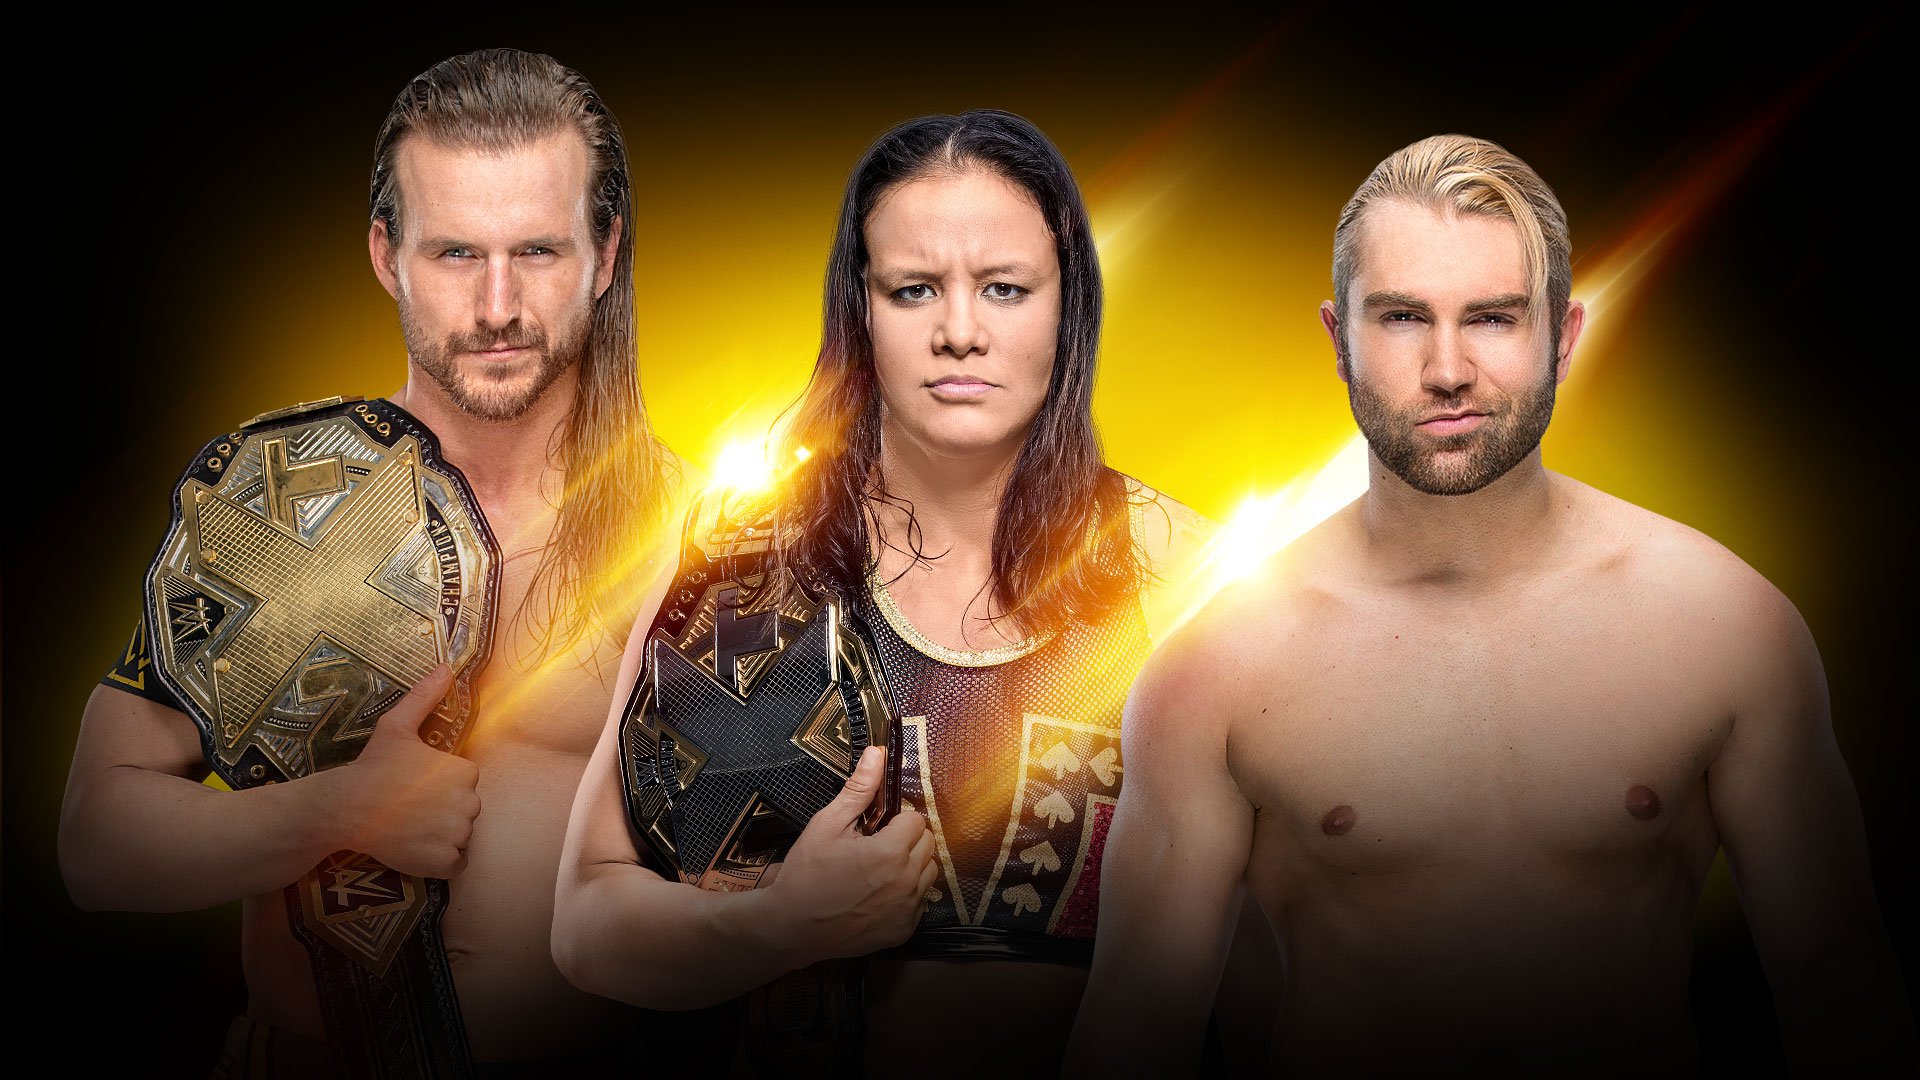 NXT heads to Oregon, Washington state and British Columbia this October